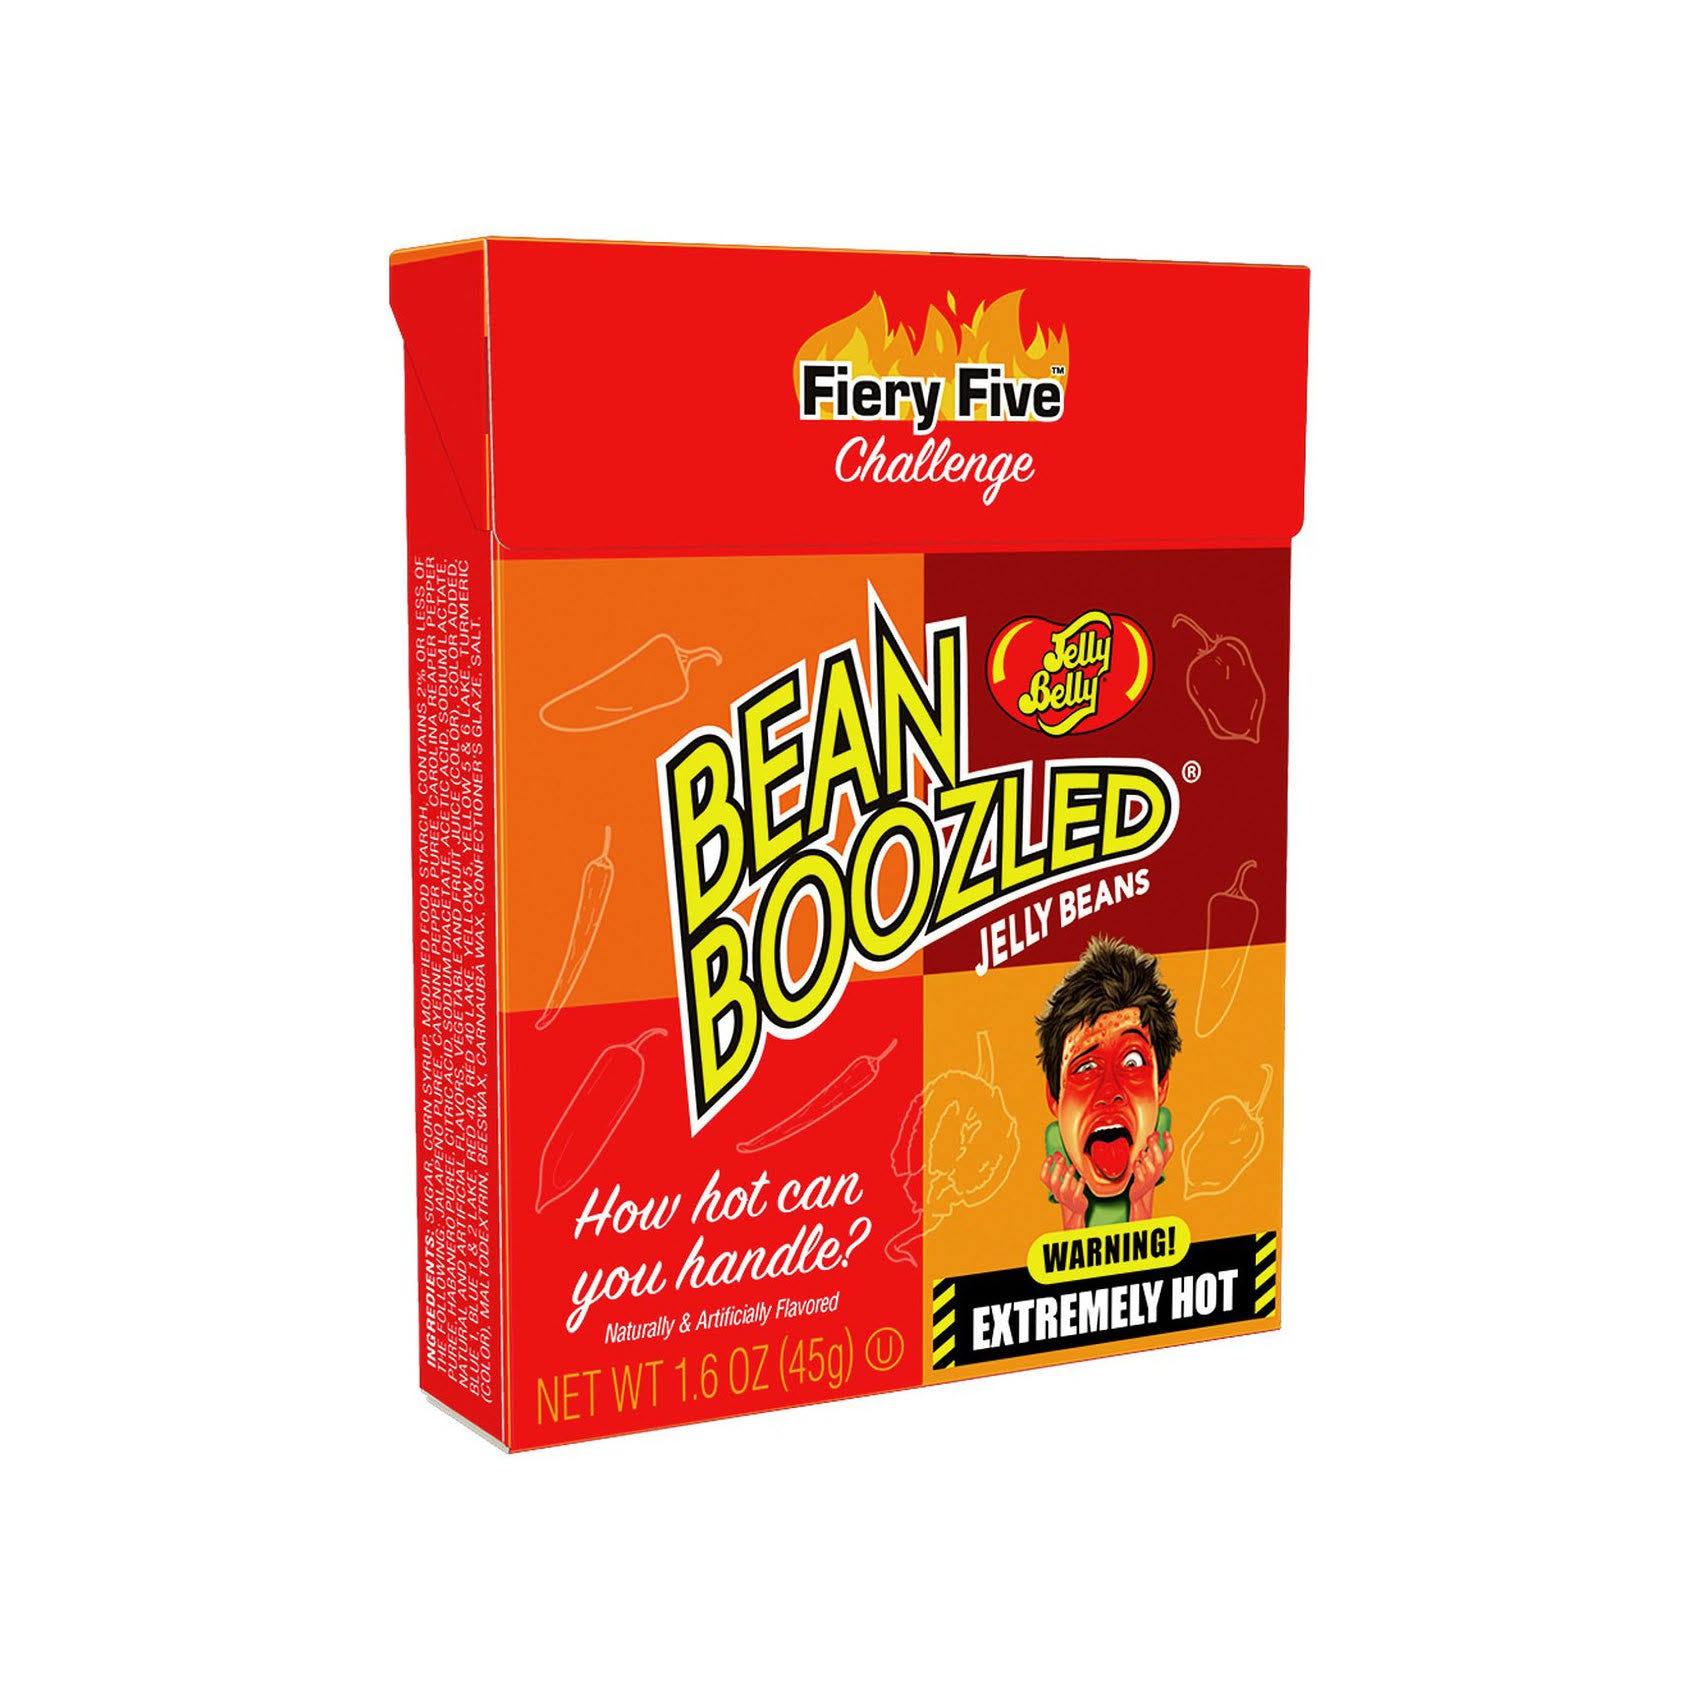 Jelly Belly Bean Boozled Jelly Beans, Fiery Five Challenge - 1.6 oz